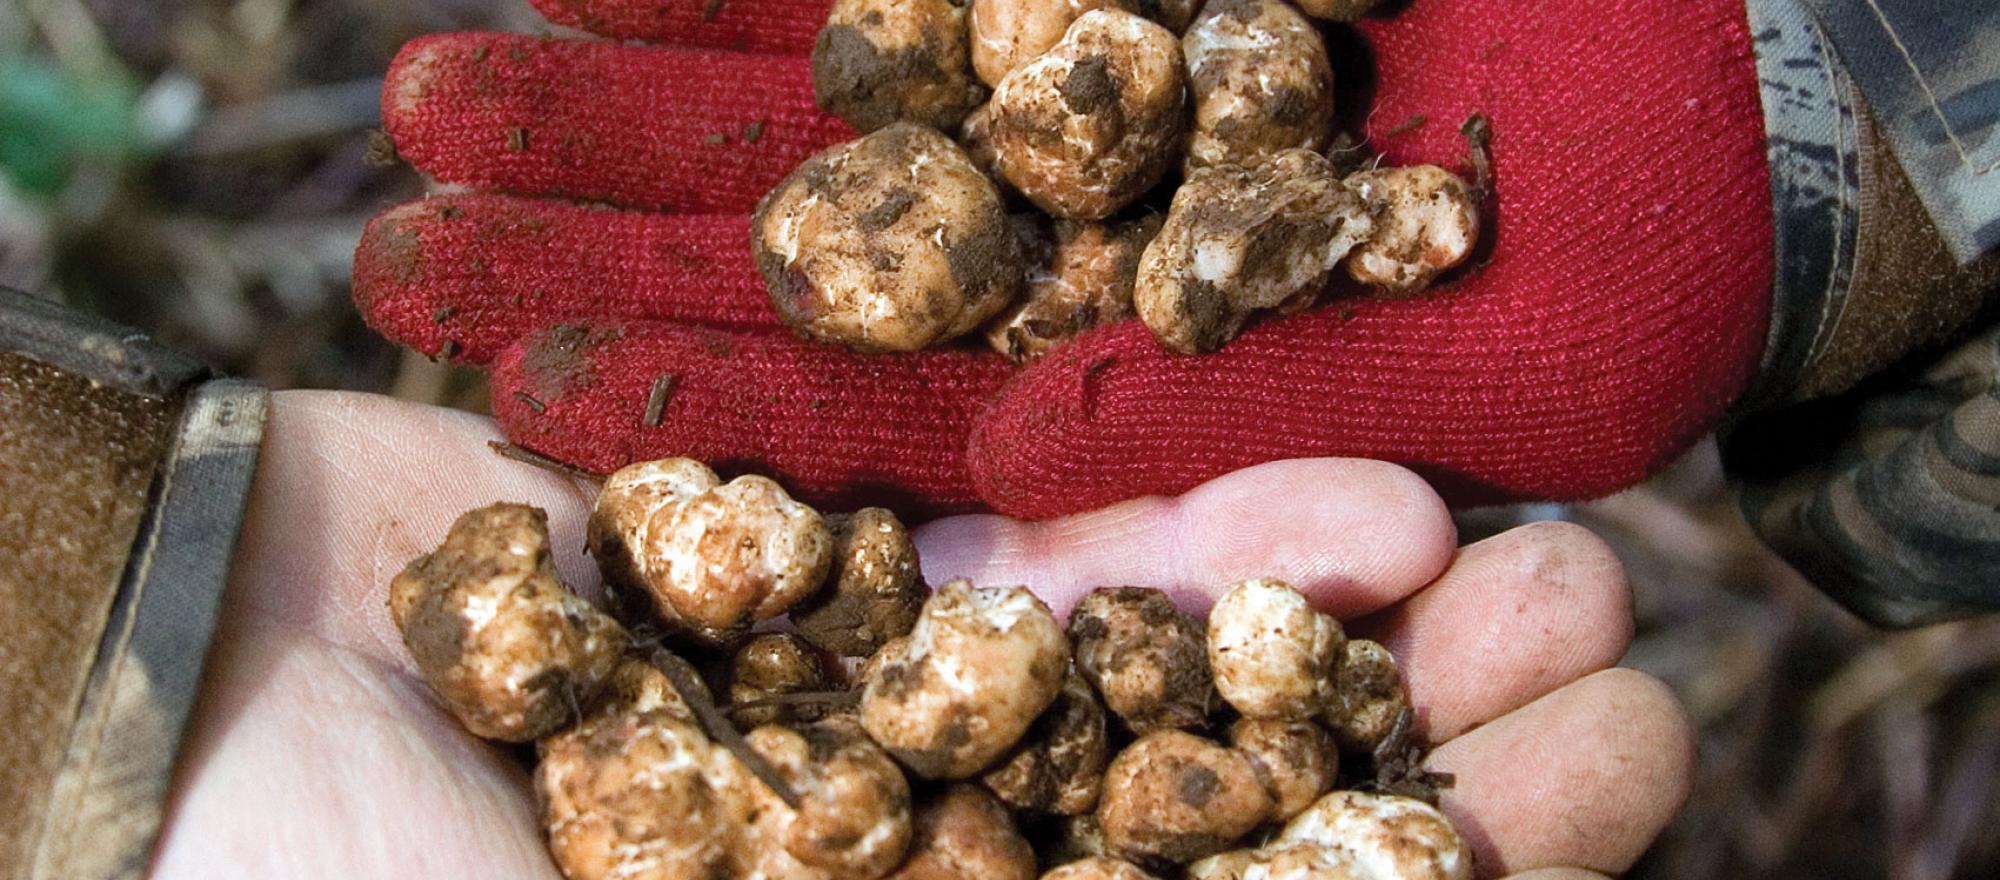 In Oregon’s lush, green Willamette Valley, black and white winter truffles grow among the roots of young Douglas firs. (Photo courtesy of Oregon Truffle Festival)